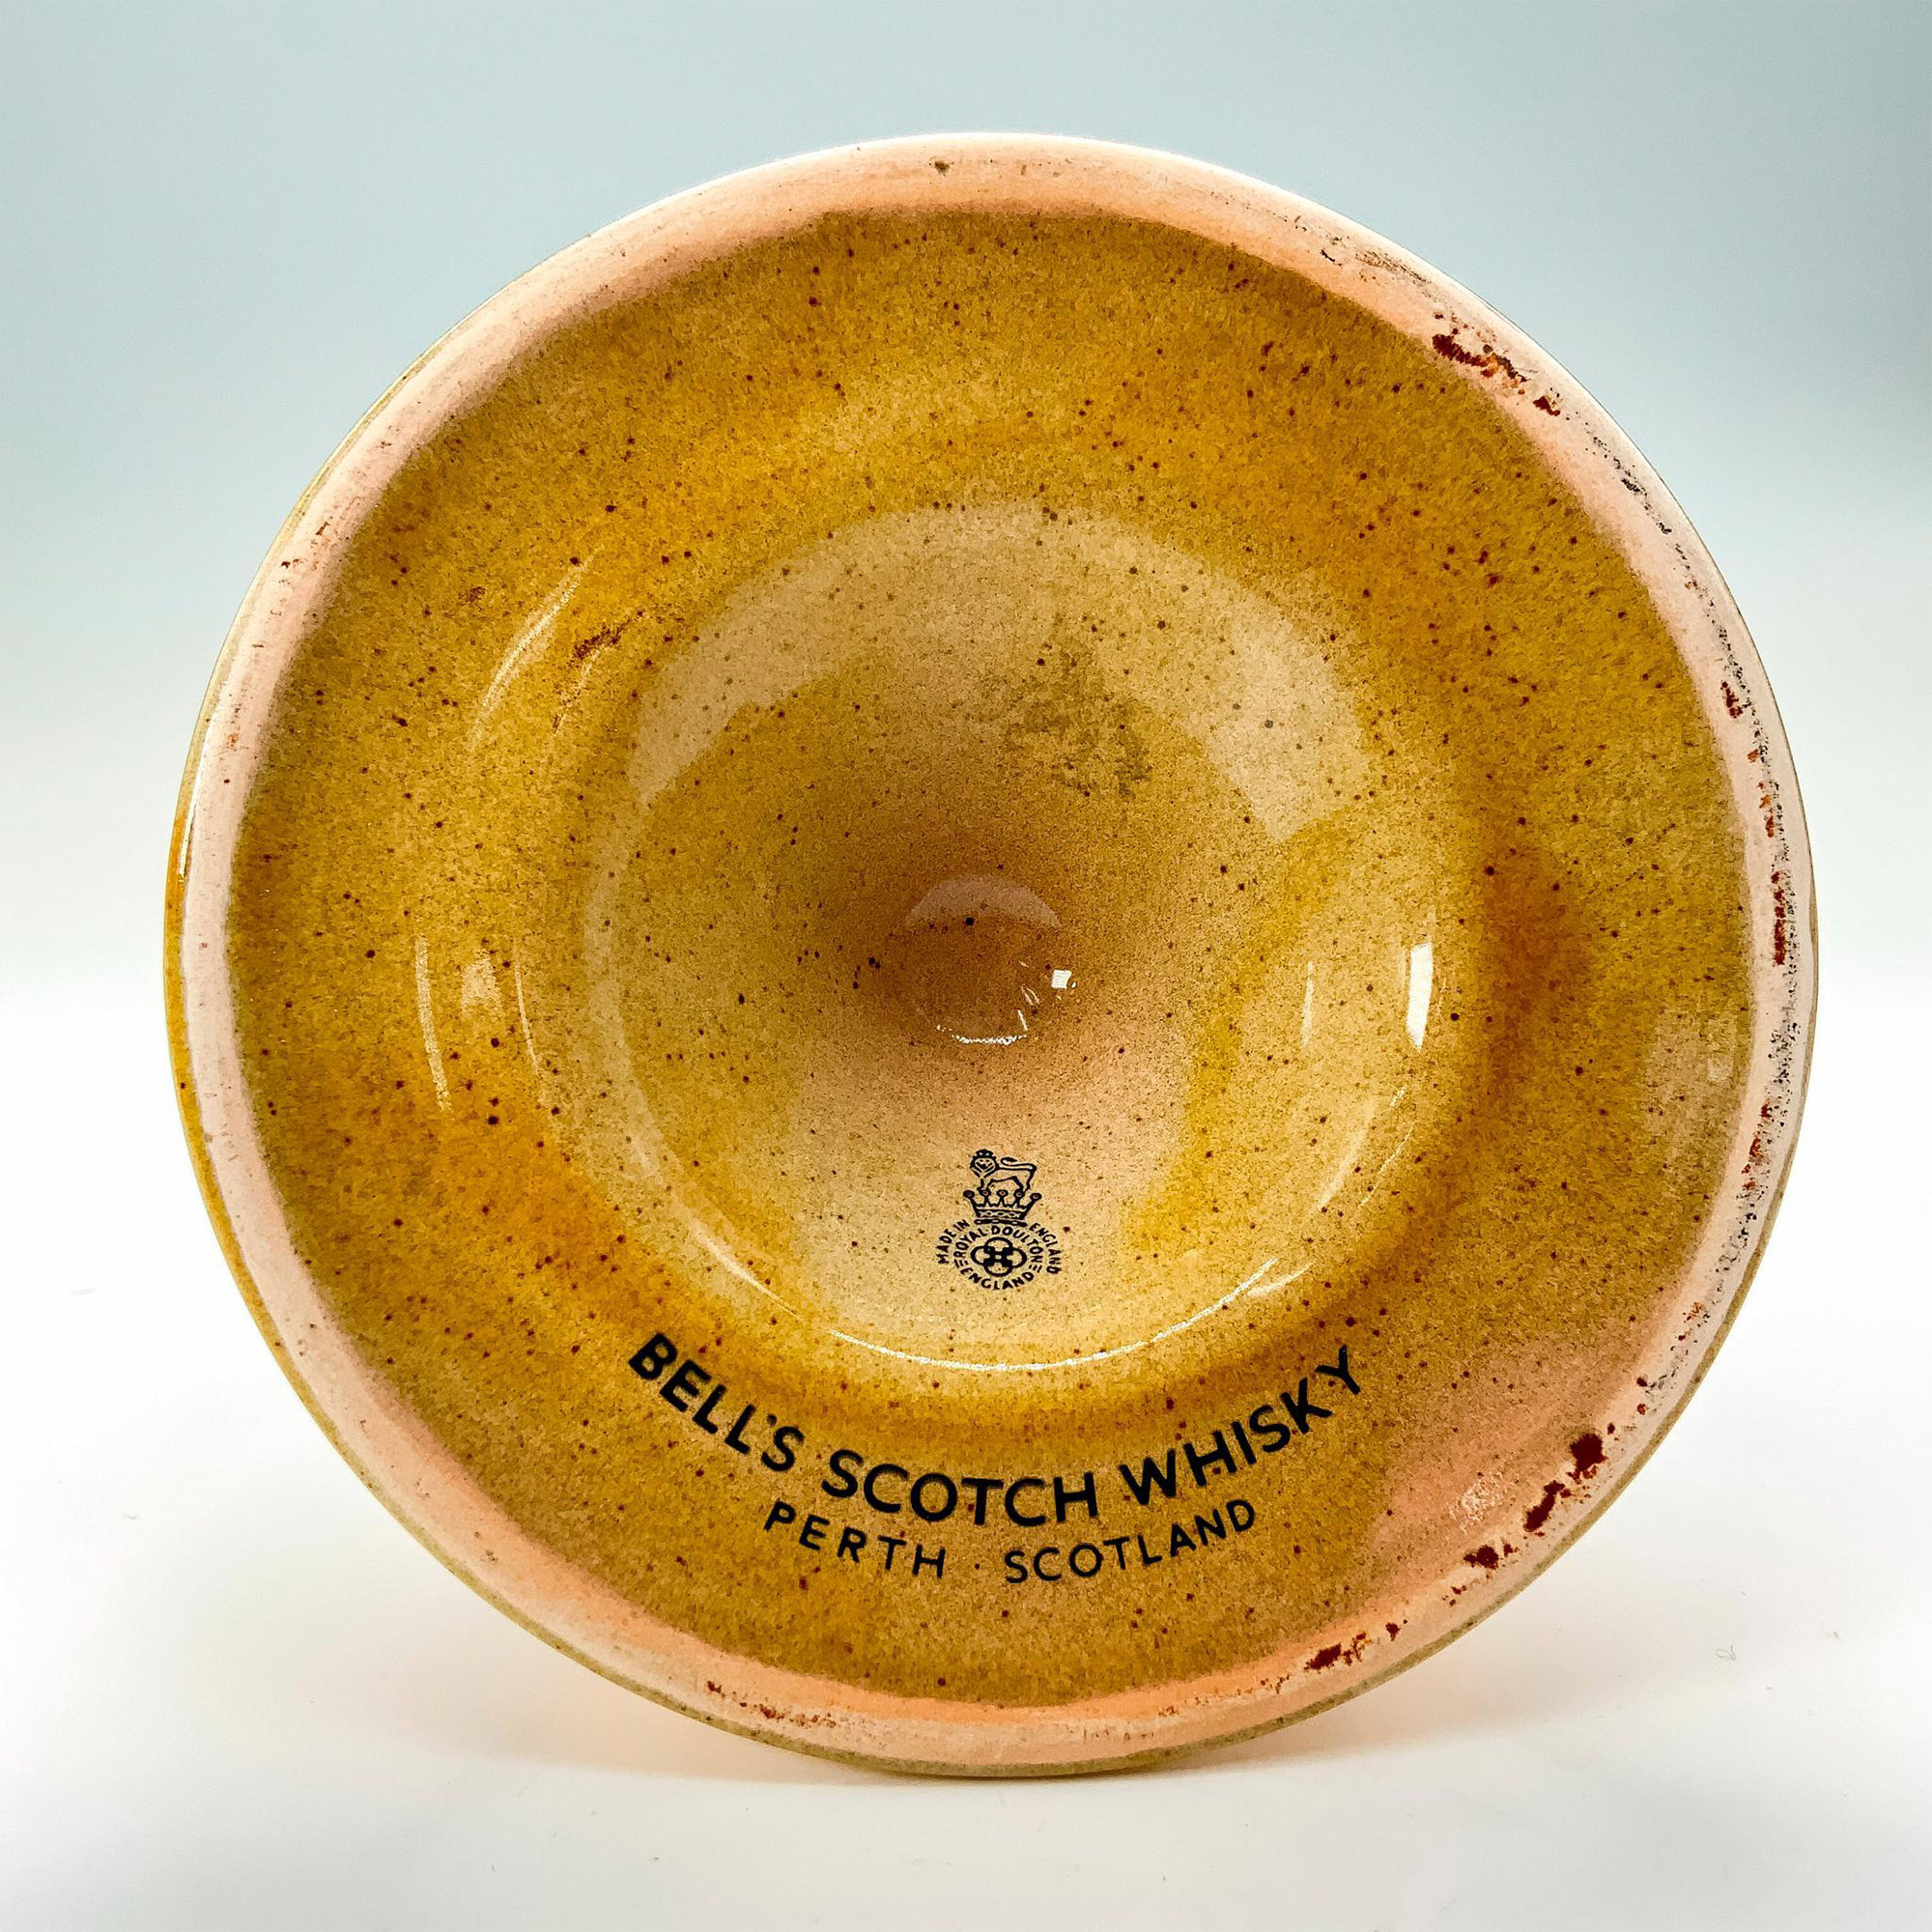 Royal Doulton Decanter, Bell's Scotch Whiskey - Image 3 of 3